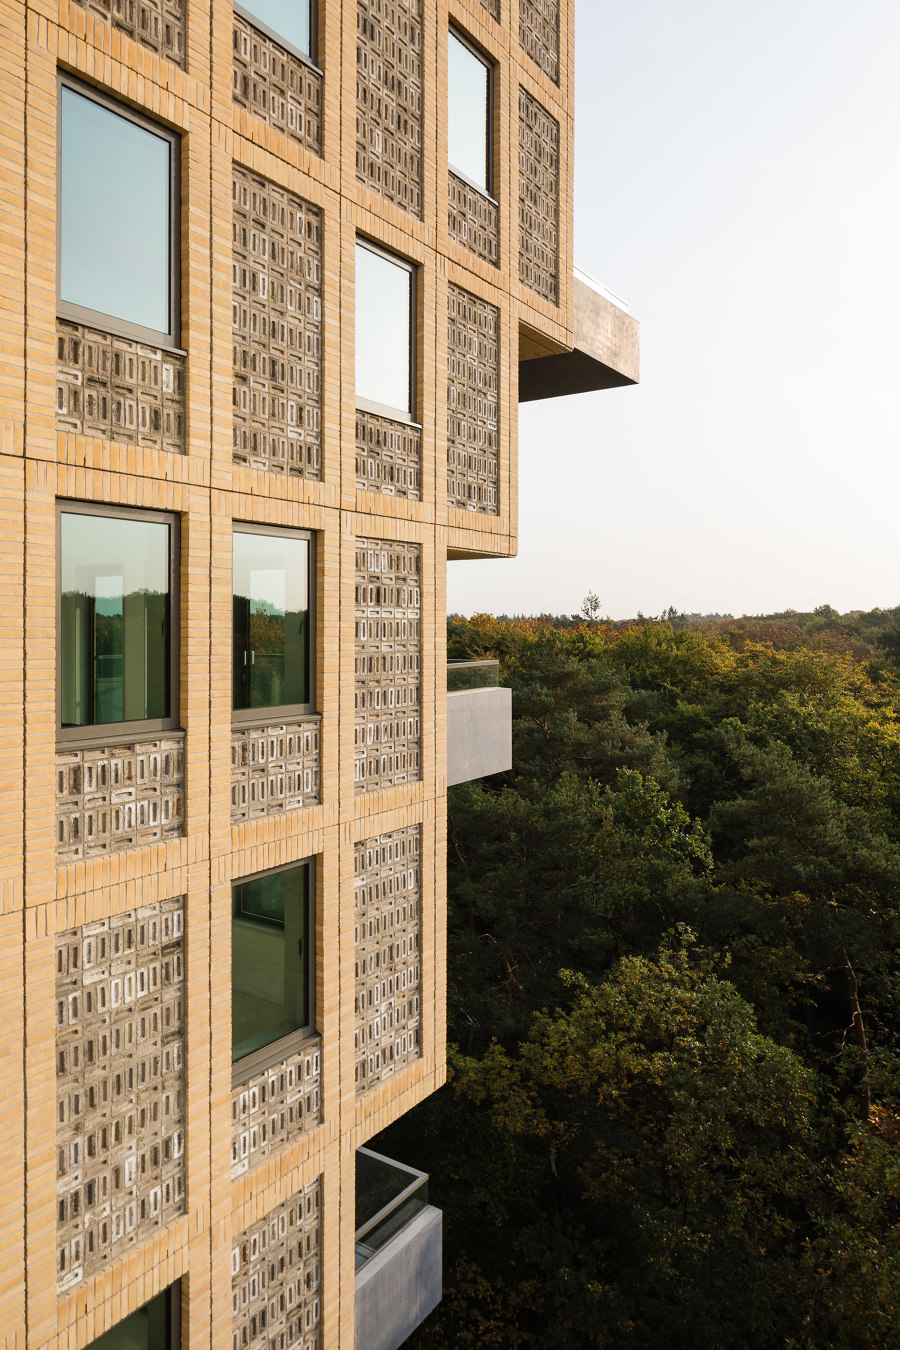 Living the high life: residential towers | Nouveautés